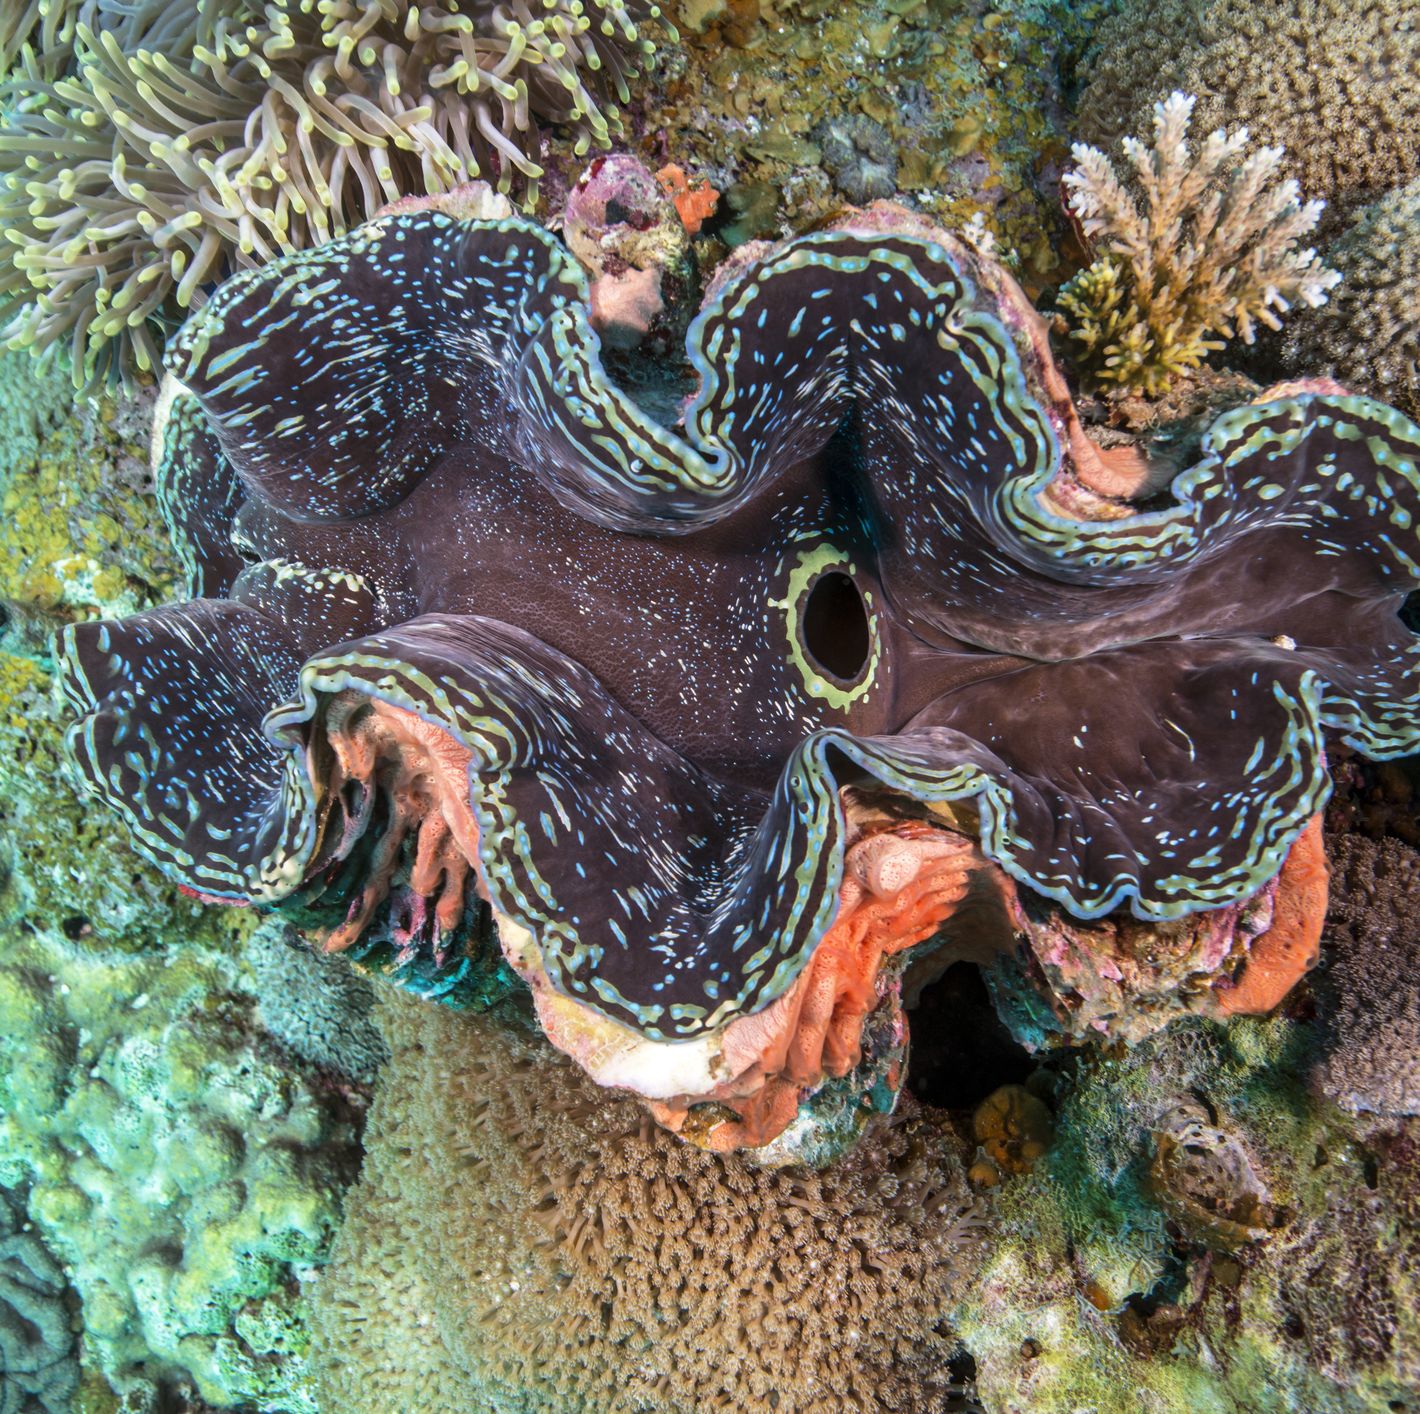 The Air Force Says Its Next Missile Tests Could Kill 219 Giant Clams, 9 Snails